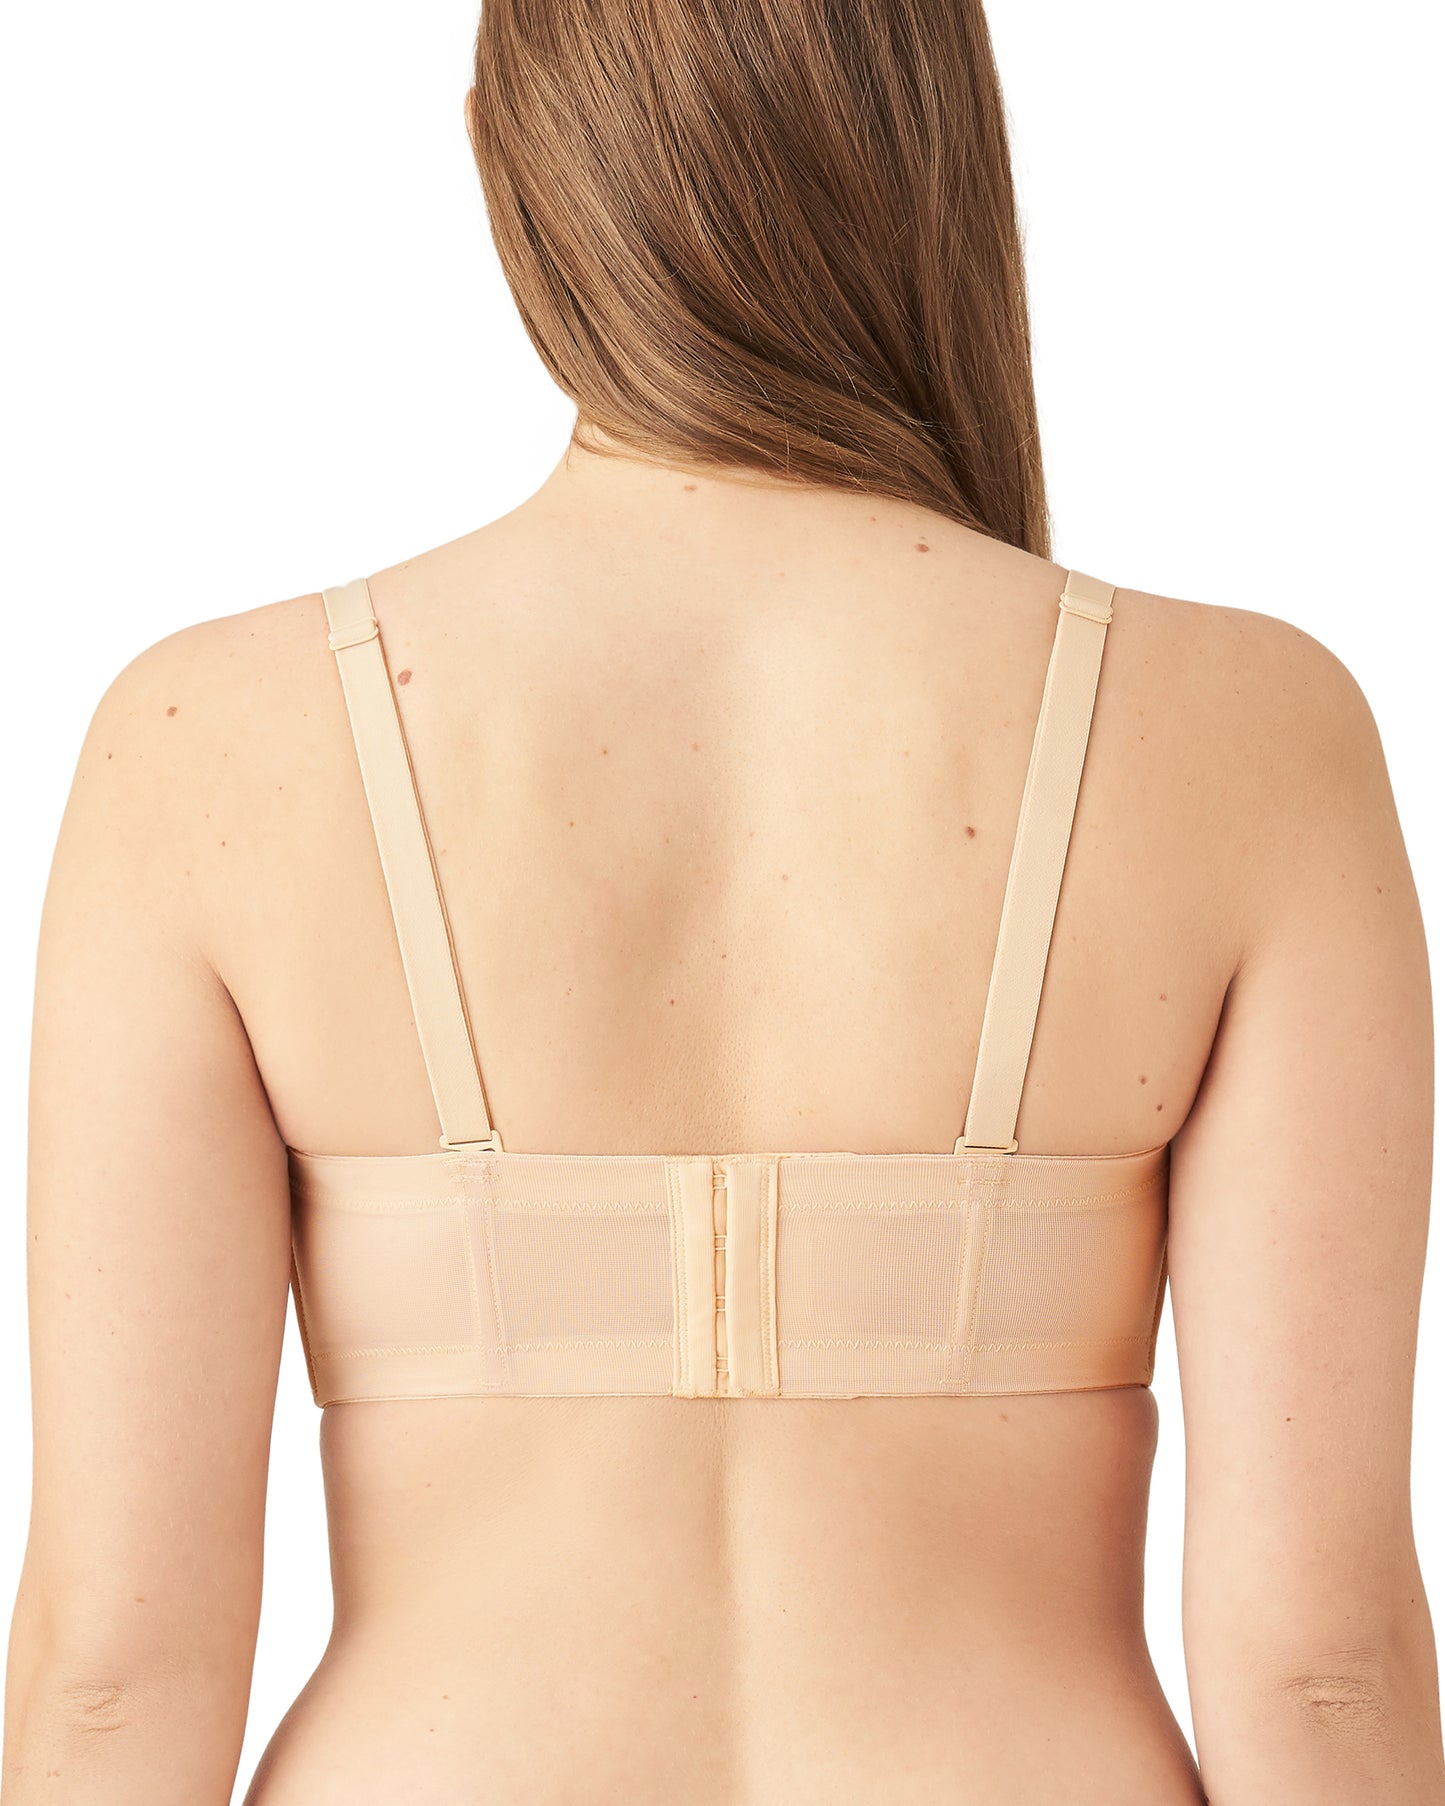 Wacoal Red Carpet Strapless Underwire Bra (More colors available) - 854119 - Natural Nude